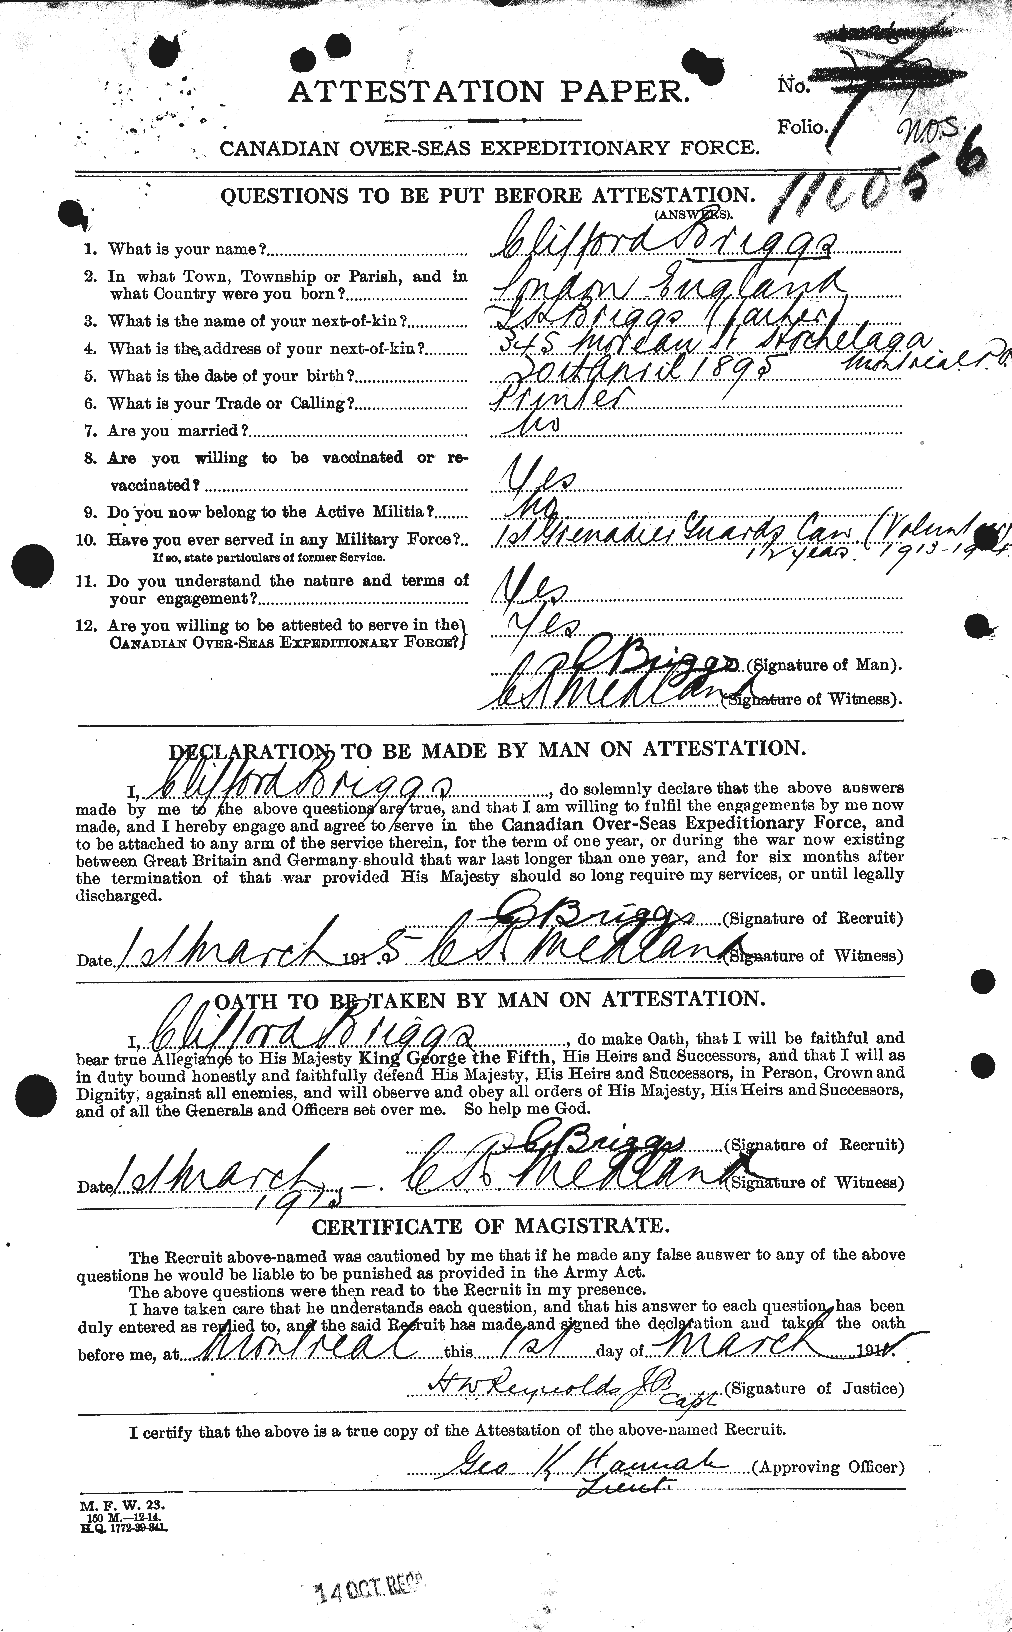 Personnel Records of the First World War - CEF 263986a